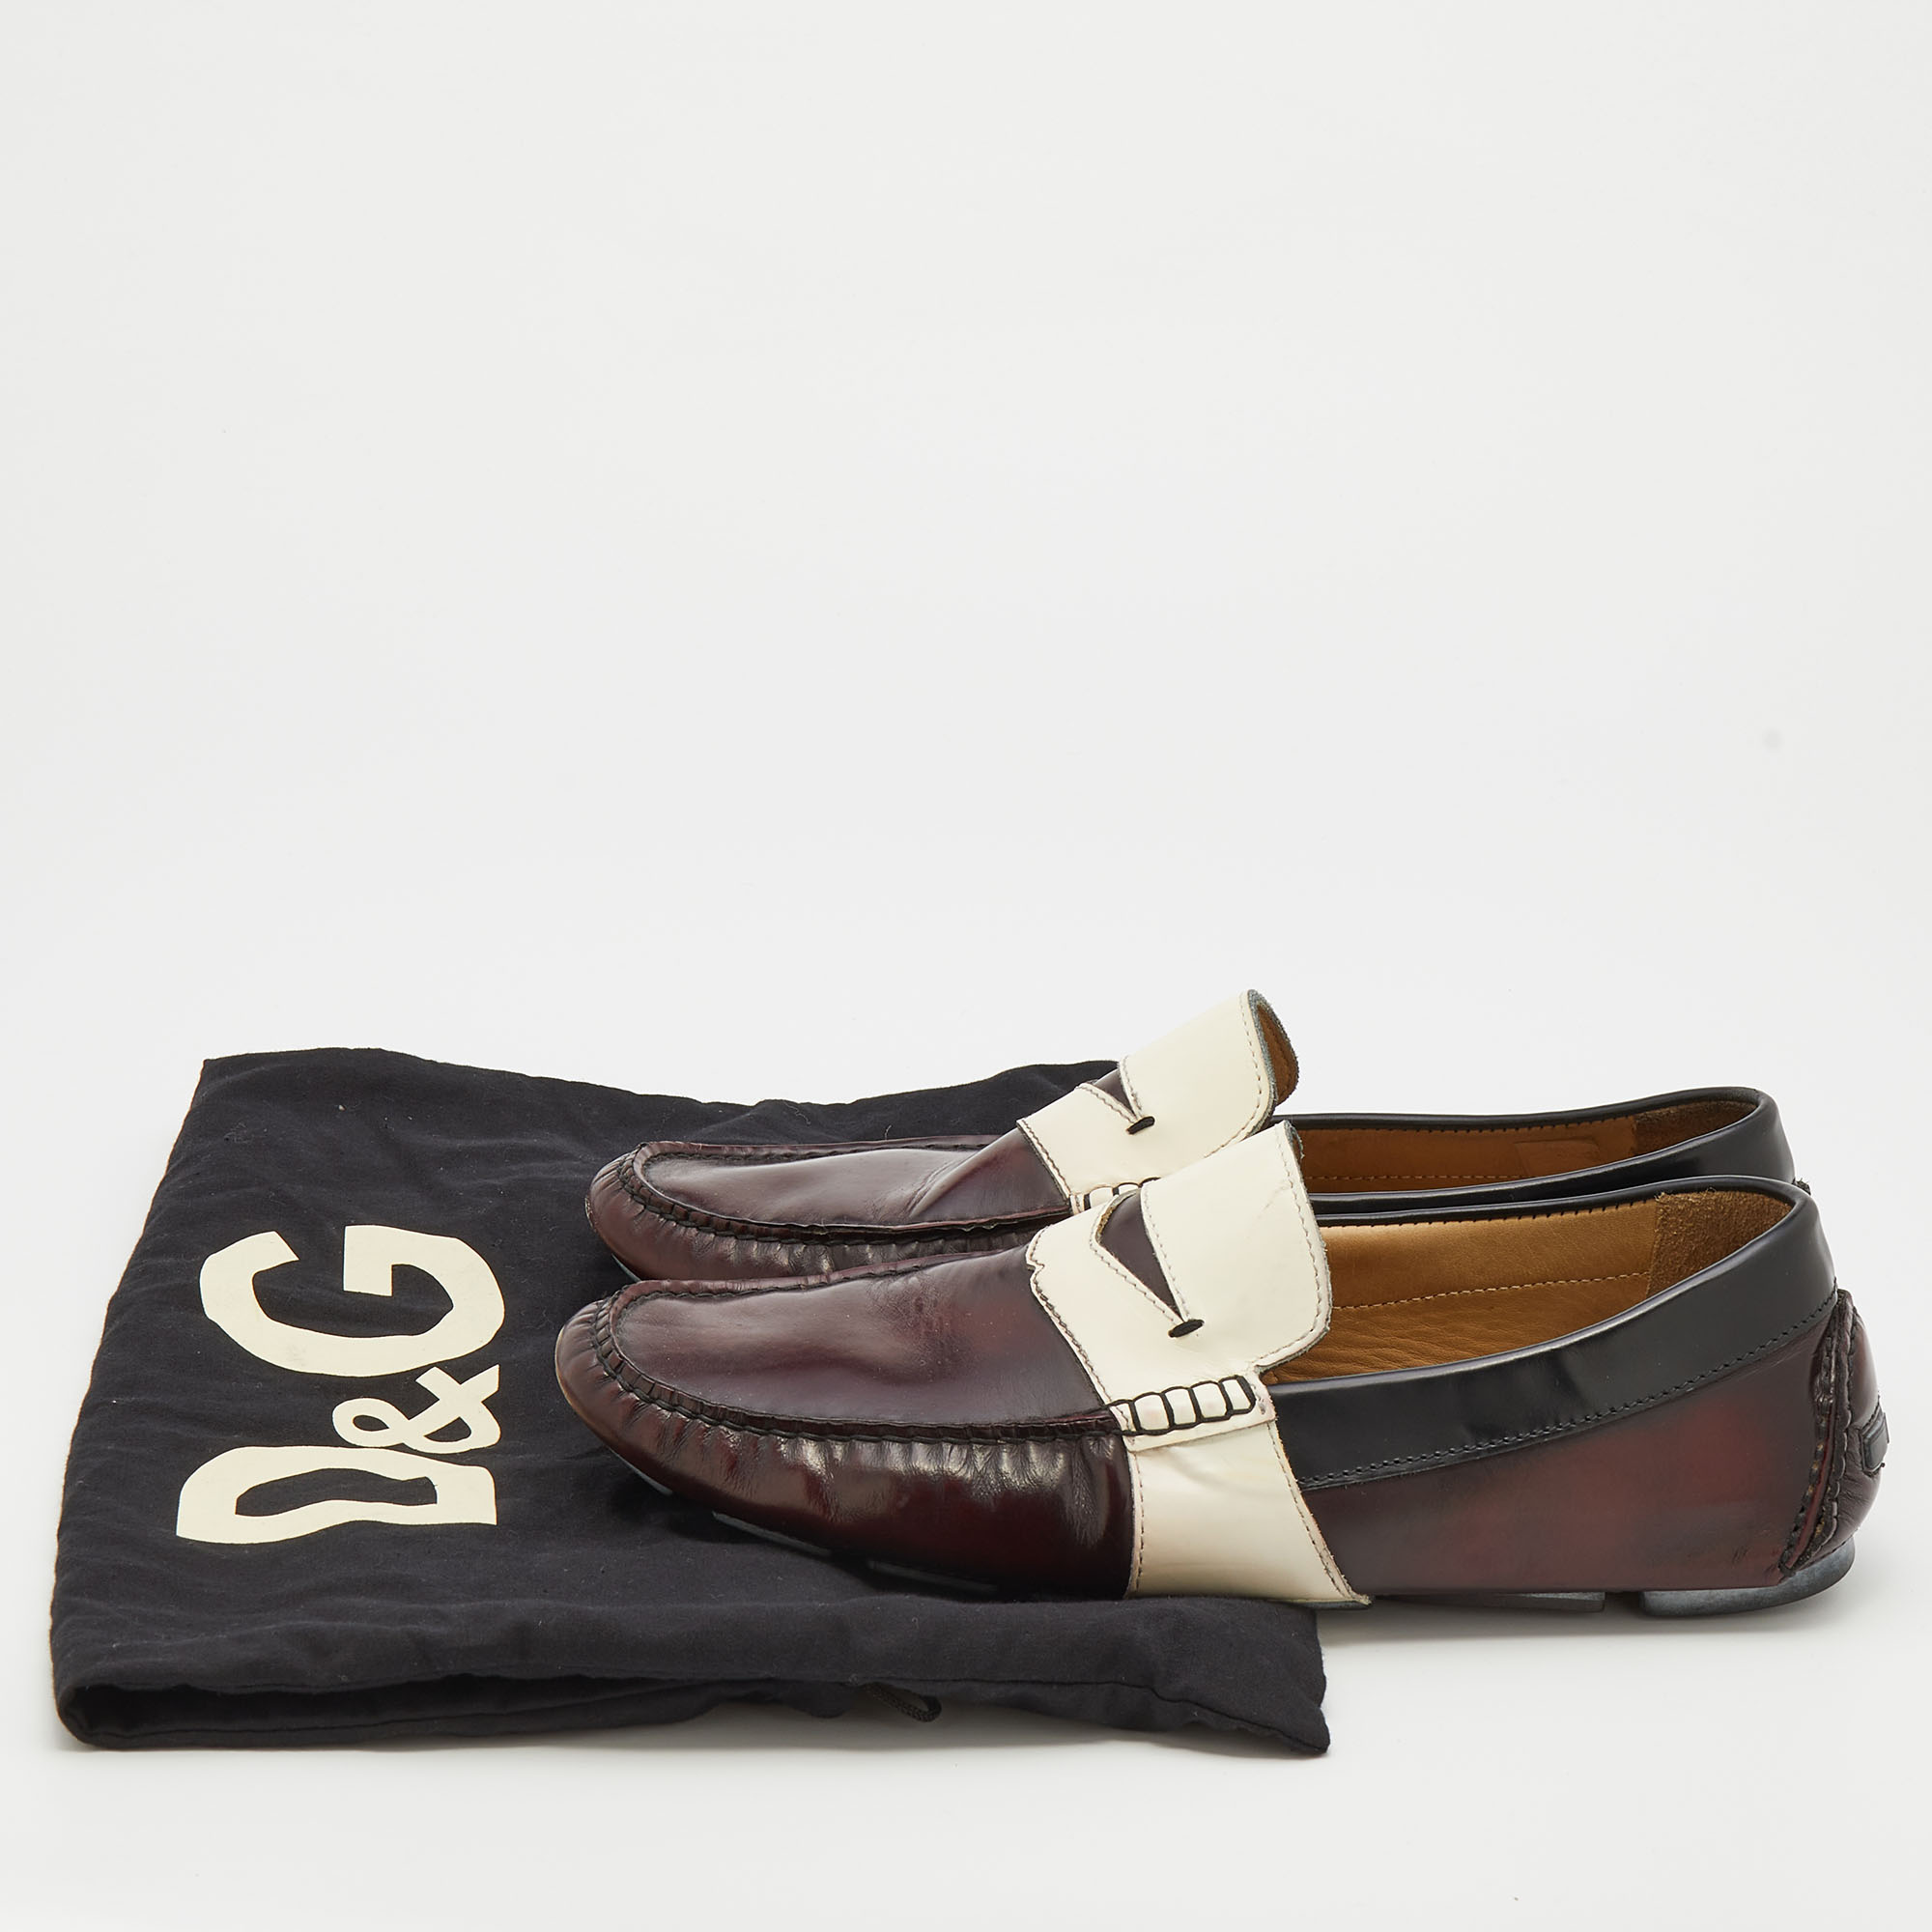 D&G Multicolor Leather Penny Slip On Loafers Size 42